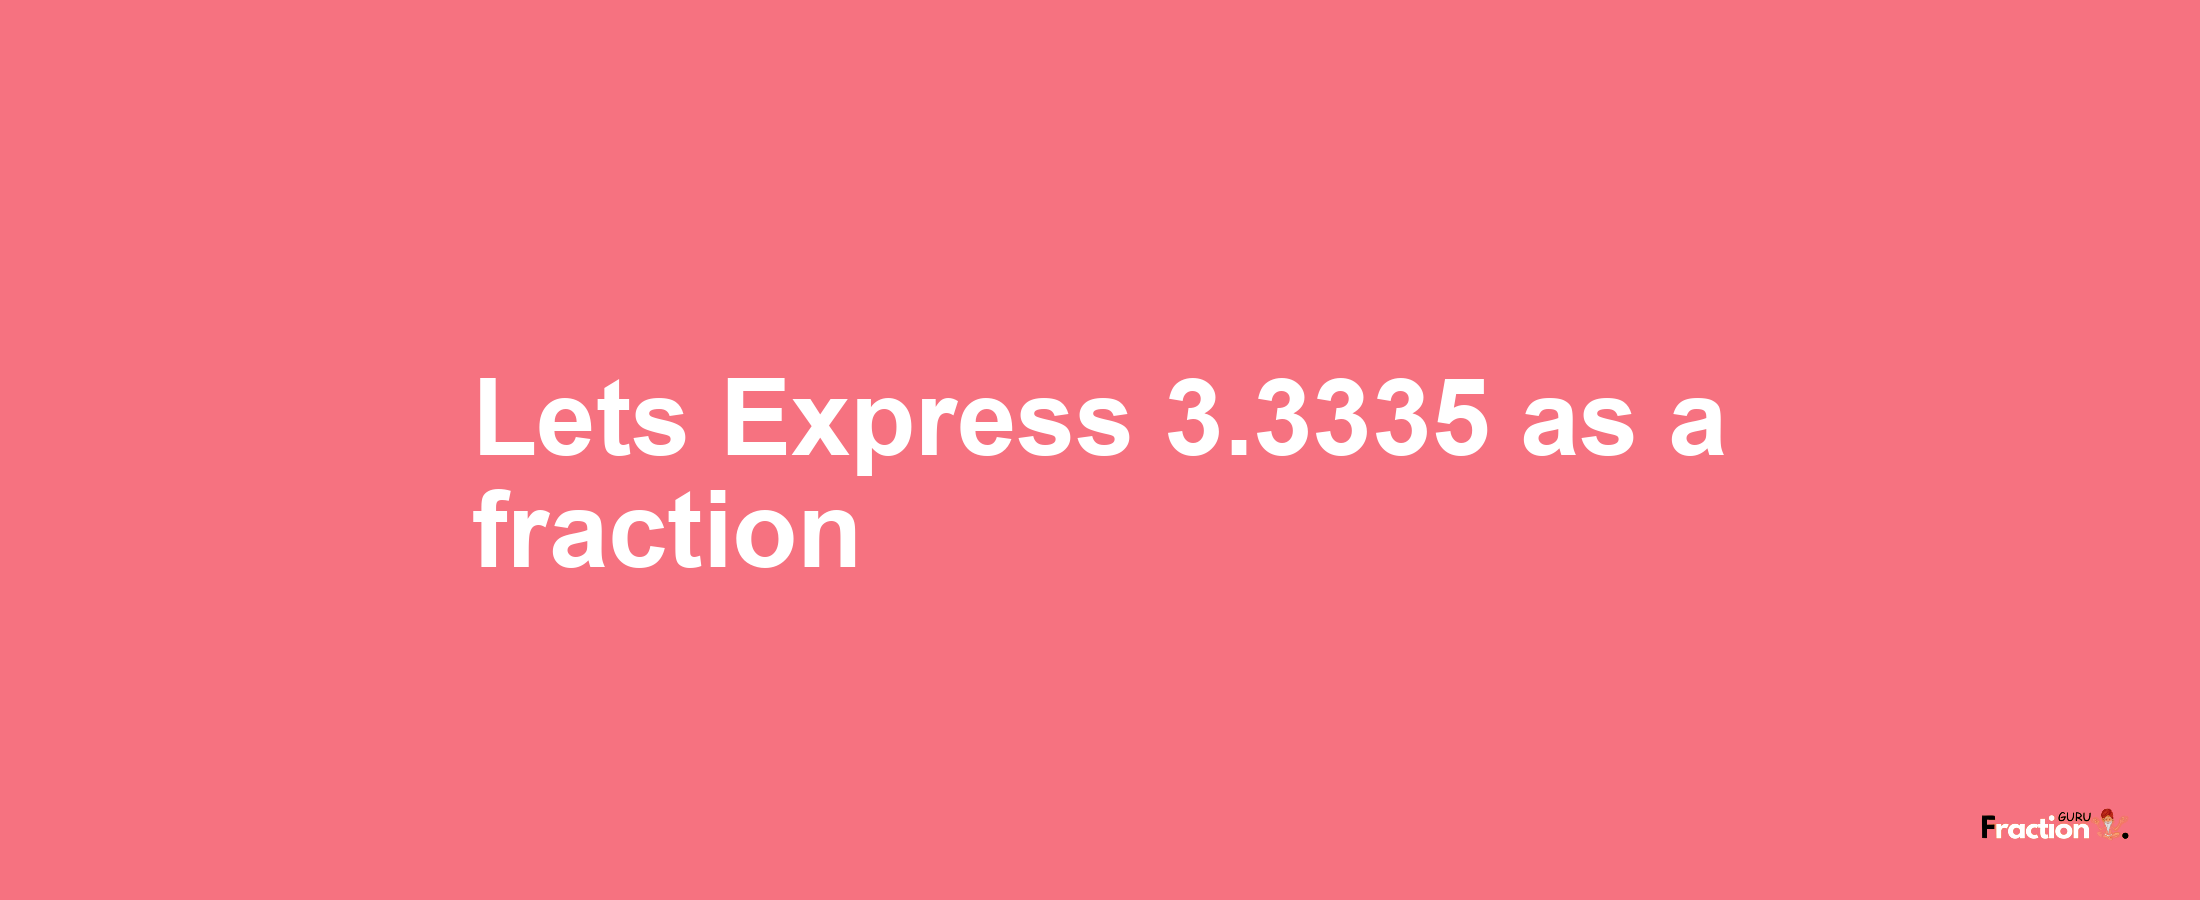 Lets Express 3.3335 as afraction